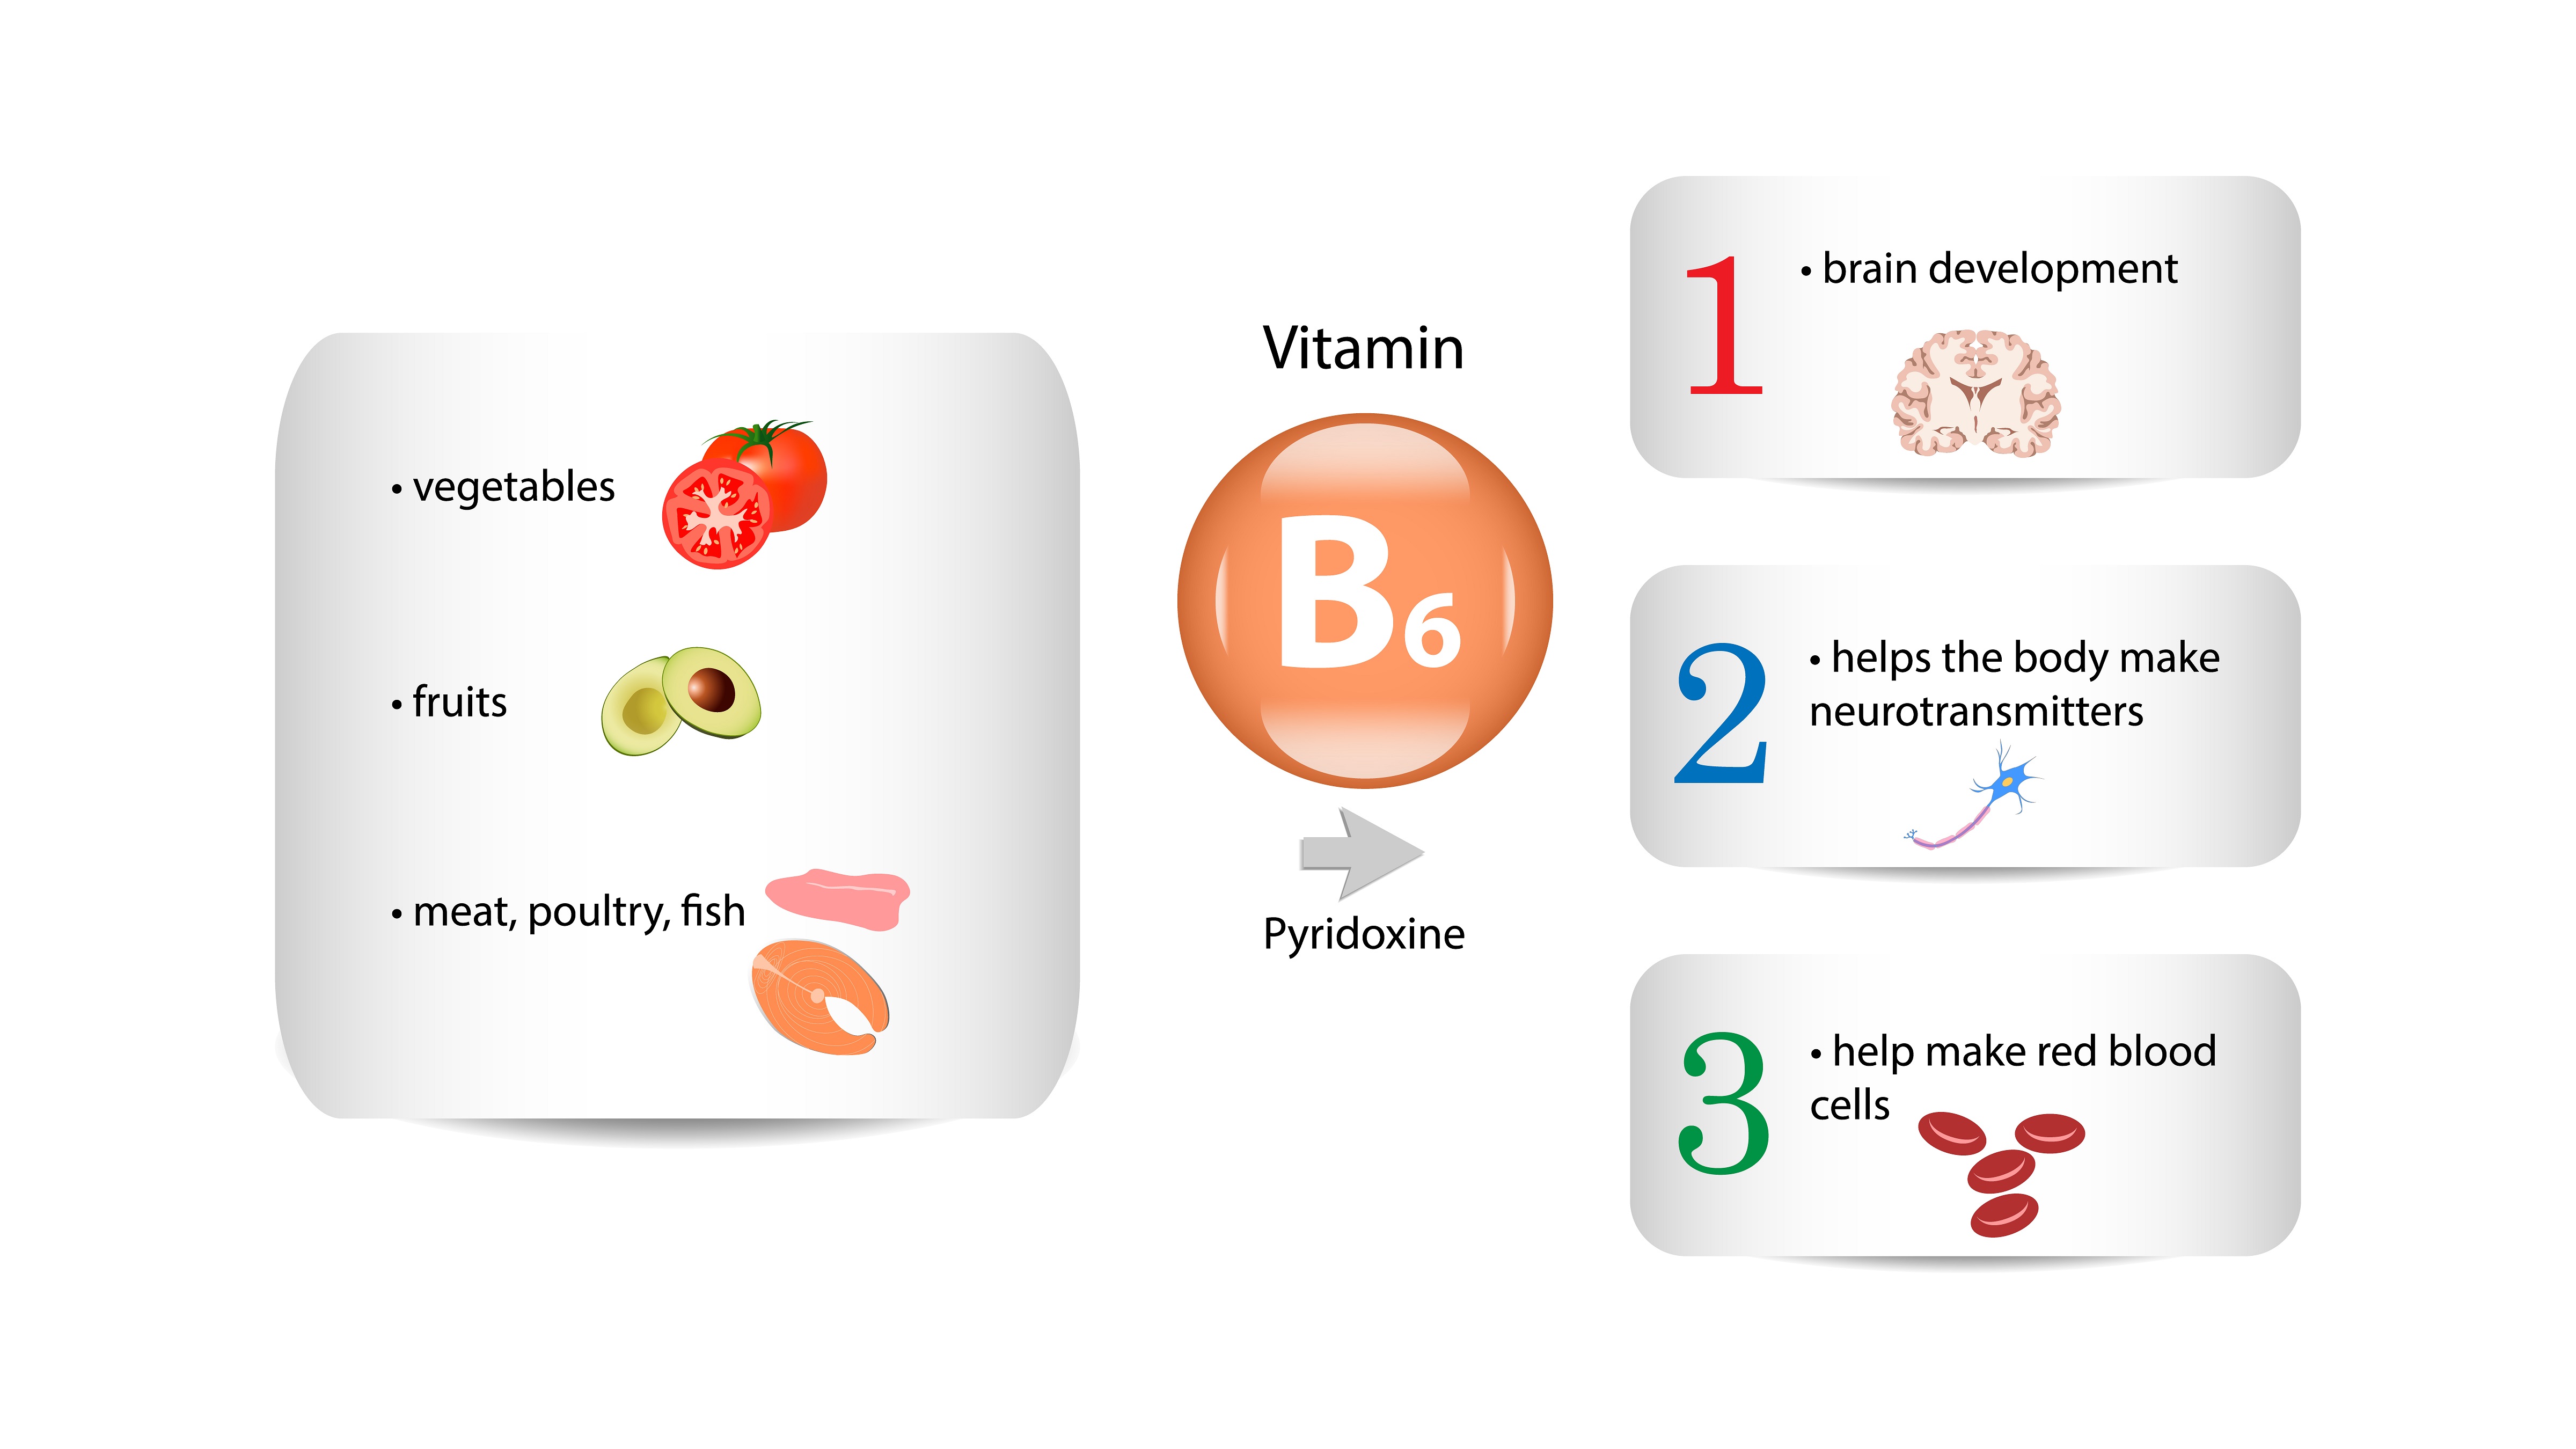 Vitamin B6 - sources and actions